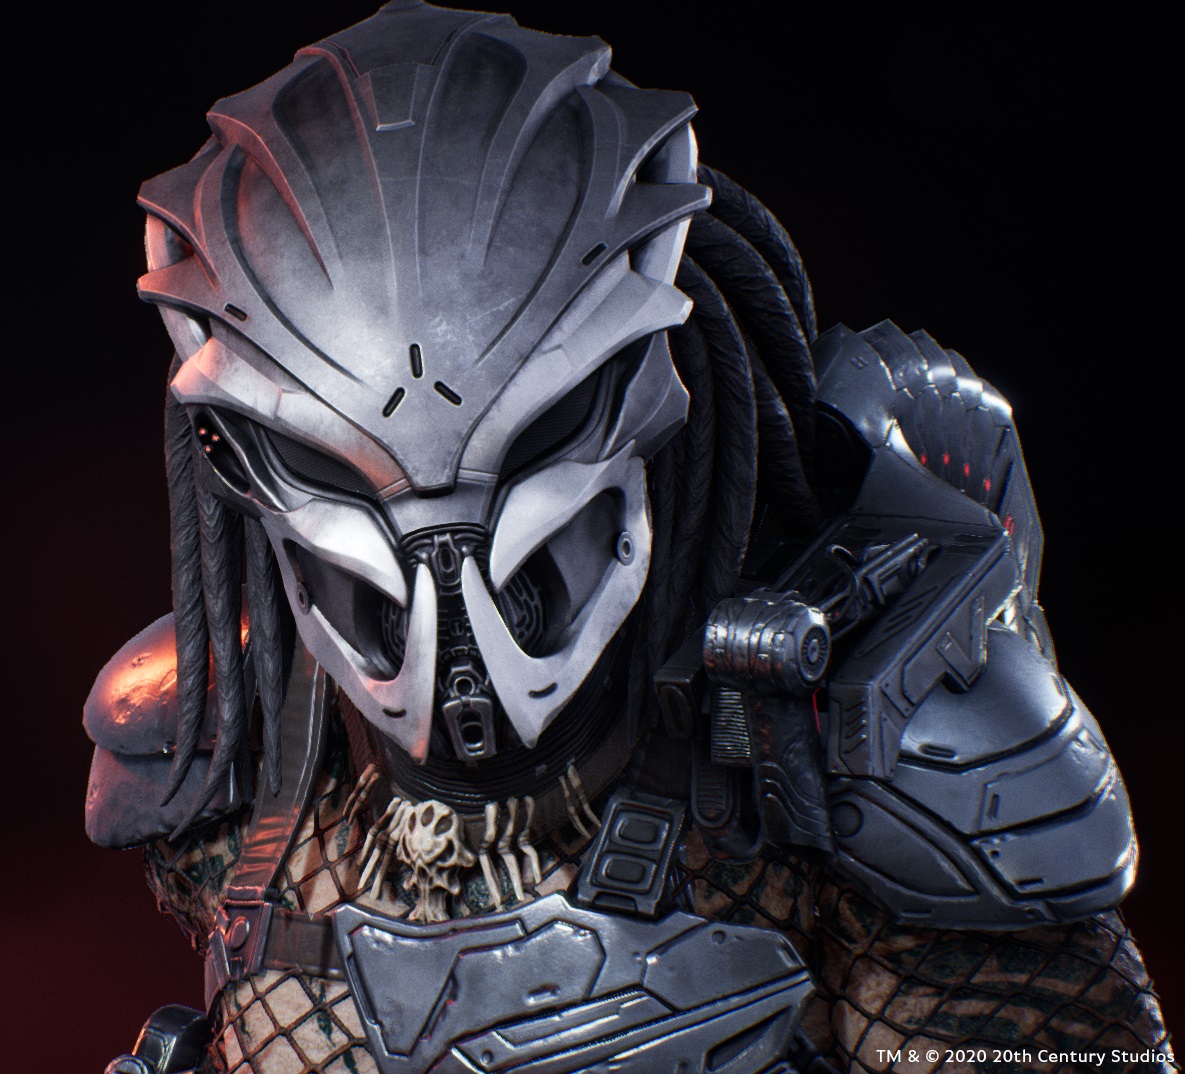 Three New Predator Masks Available Announcements - Predator: Hunting Grounds